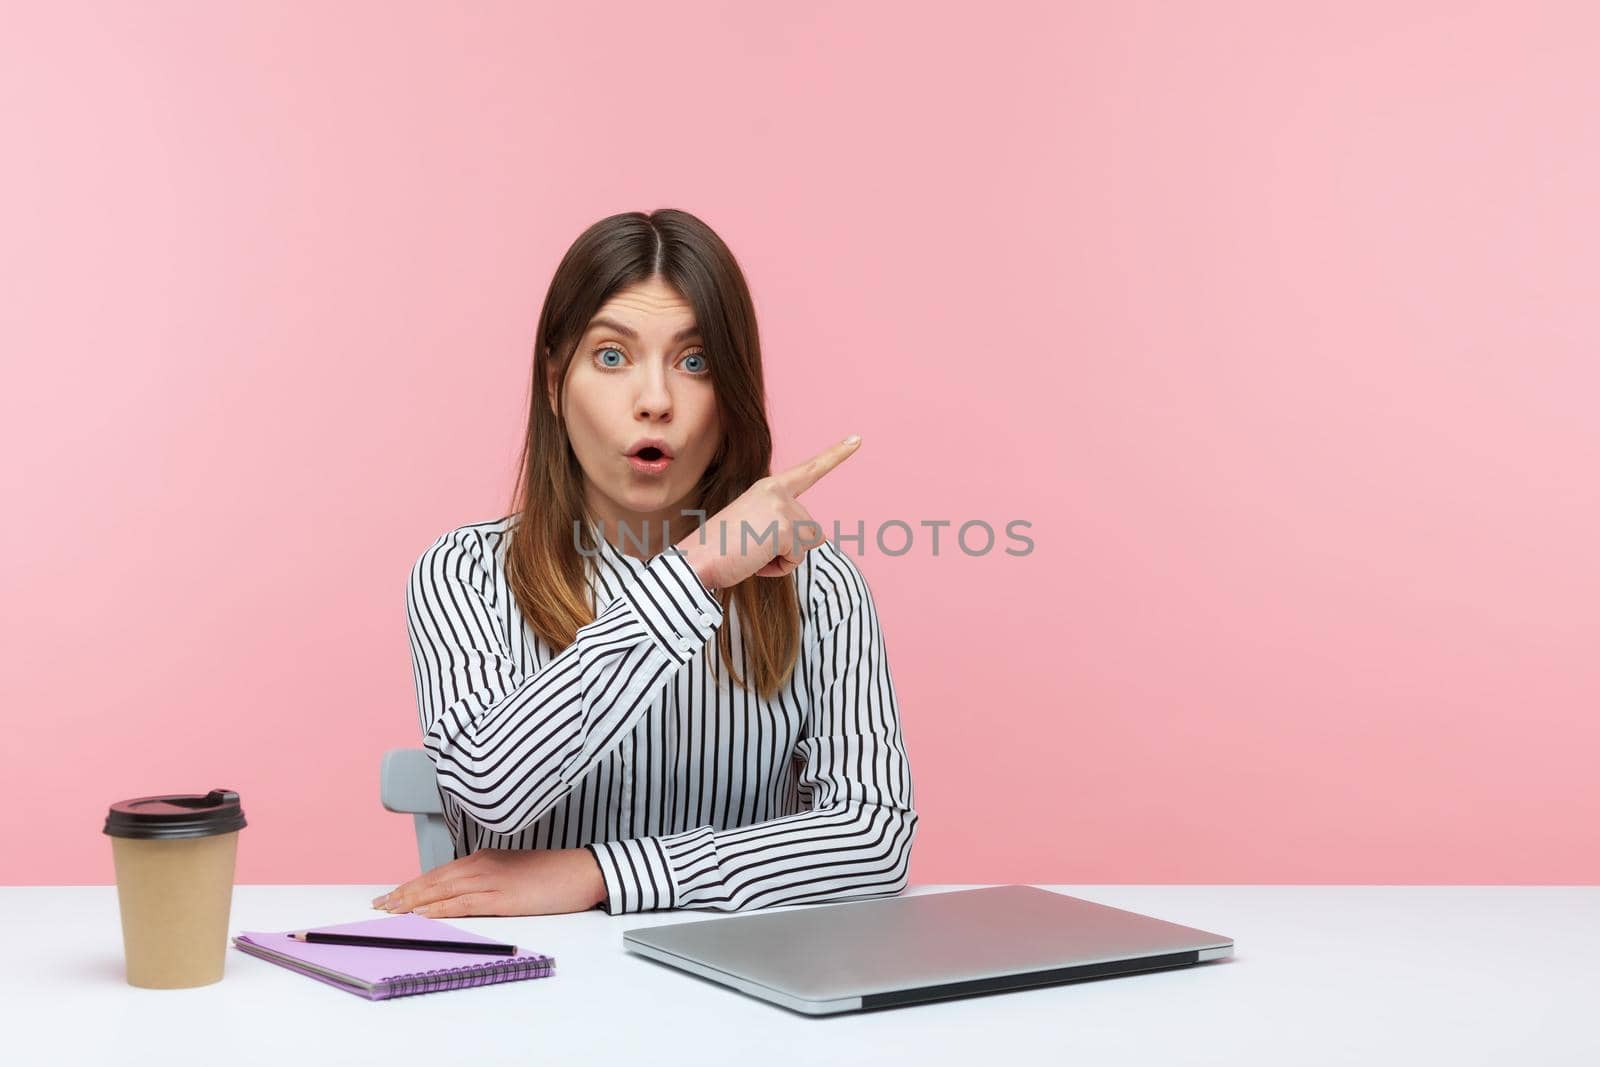 Excited shocked woman pointing finger away paying your attention at empty space for advertising banner, looking at camera with astonishment. Indoor studio shot isolated on pink background